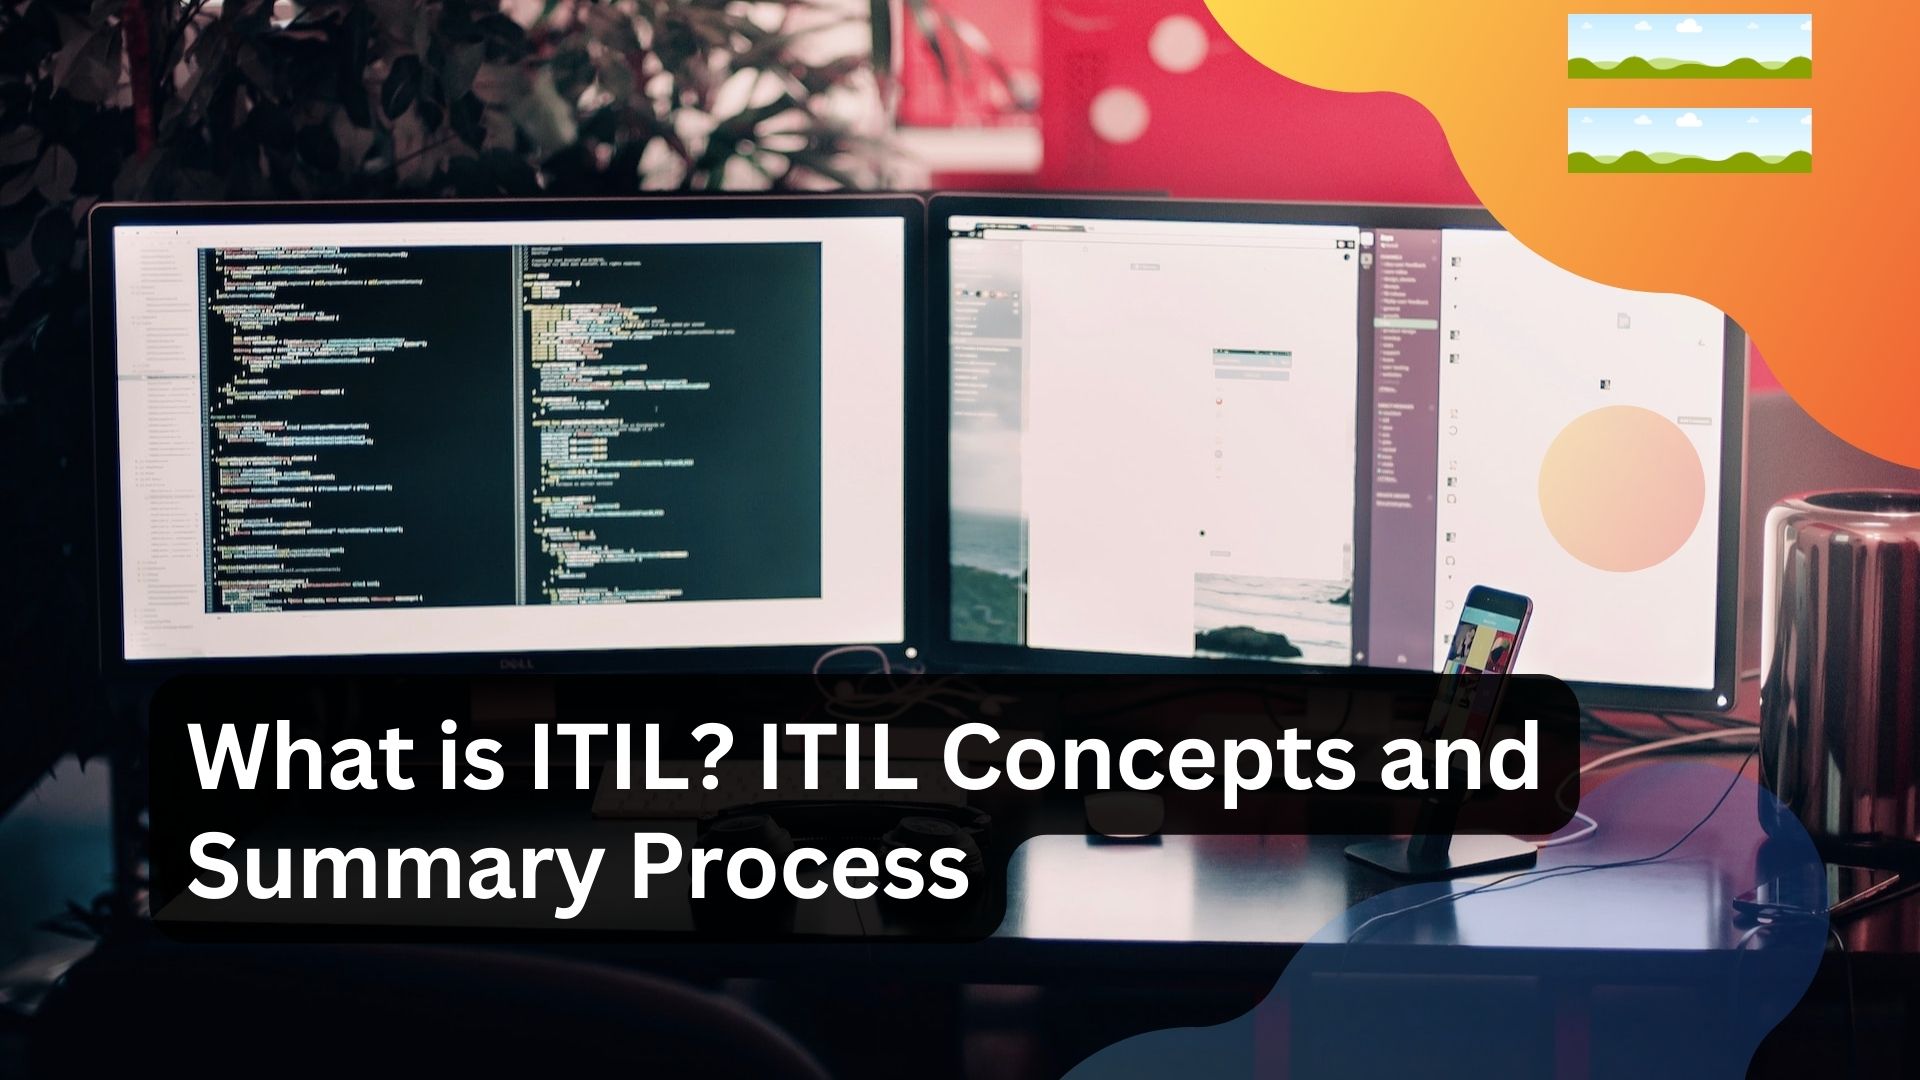 What is ITIL? ITIL Concepts and Summary Process